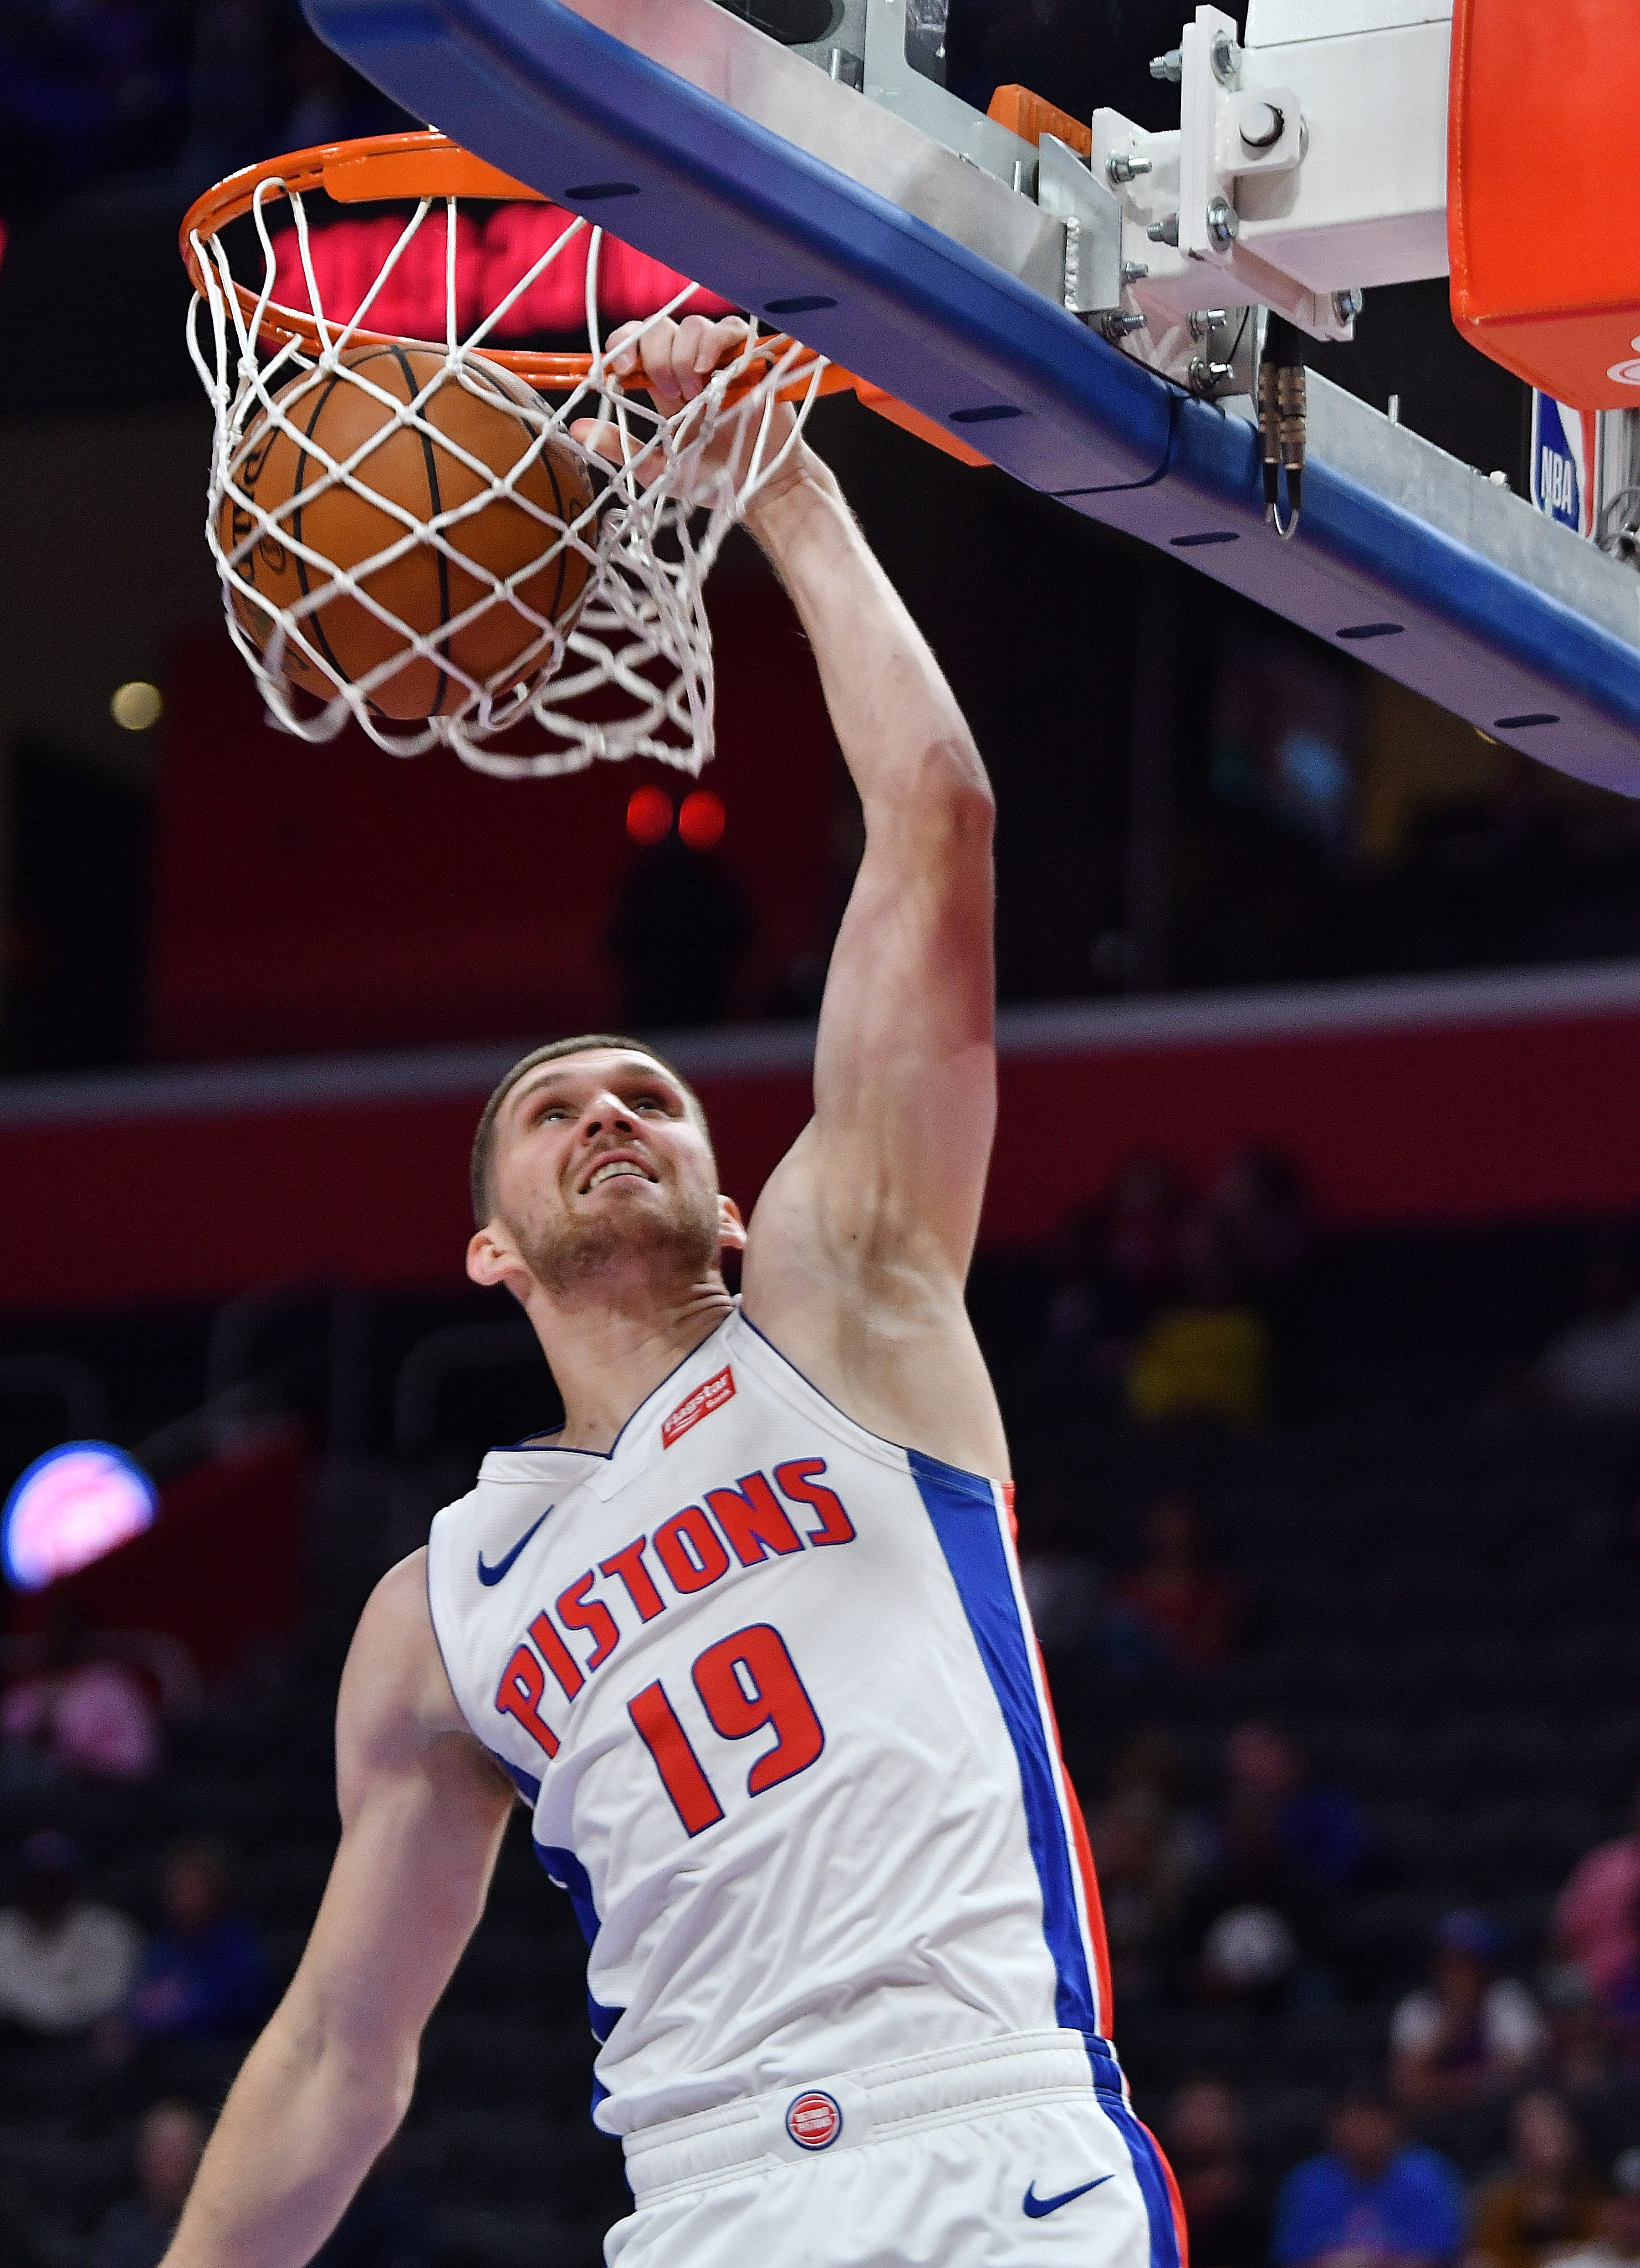 Svi Mykhailiuk: Age: 22. Ht: 6-8. Wt: 205. 2018-19 stats: 2.0 pts, 1.3 assts, 50% 3FG. Outlook: After a summer to get acclimated, Mykhailiuk looks more comfortable in the offense and has improved on the defensive end. He ’ s getting more playing time but will have to take another step to move into the regular rotation.